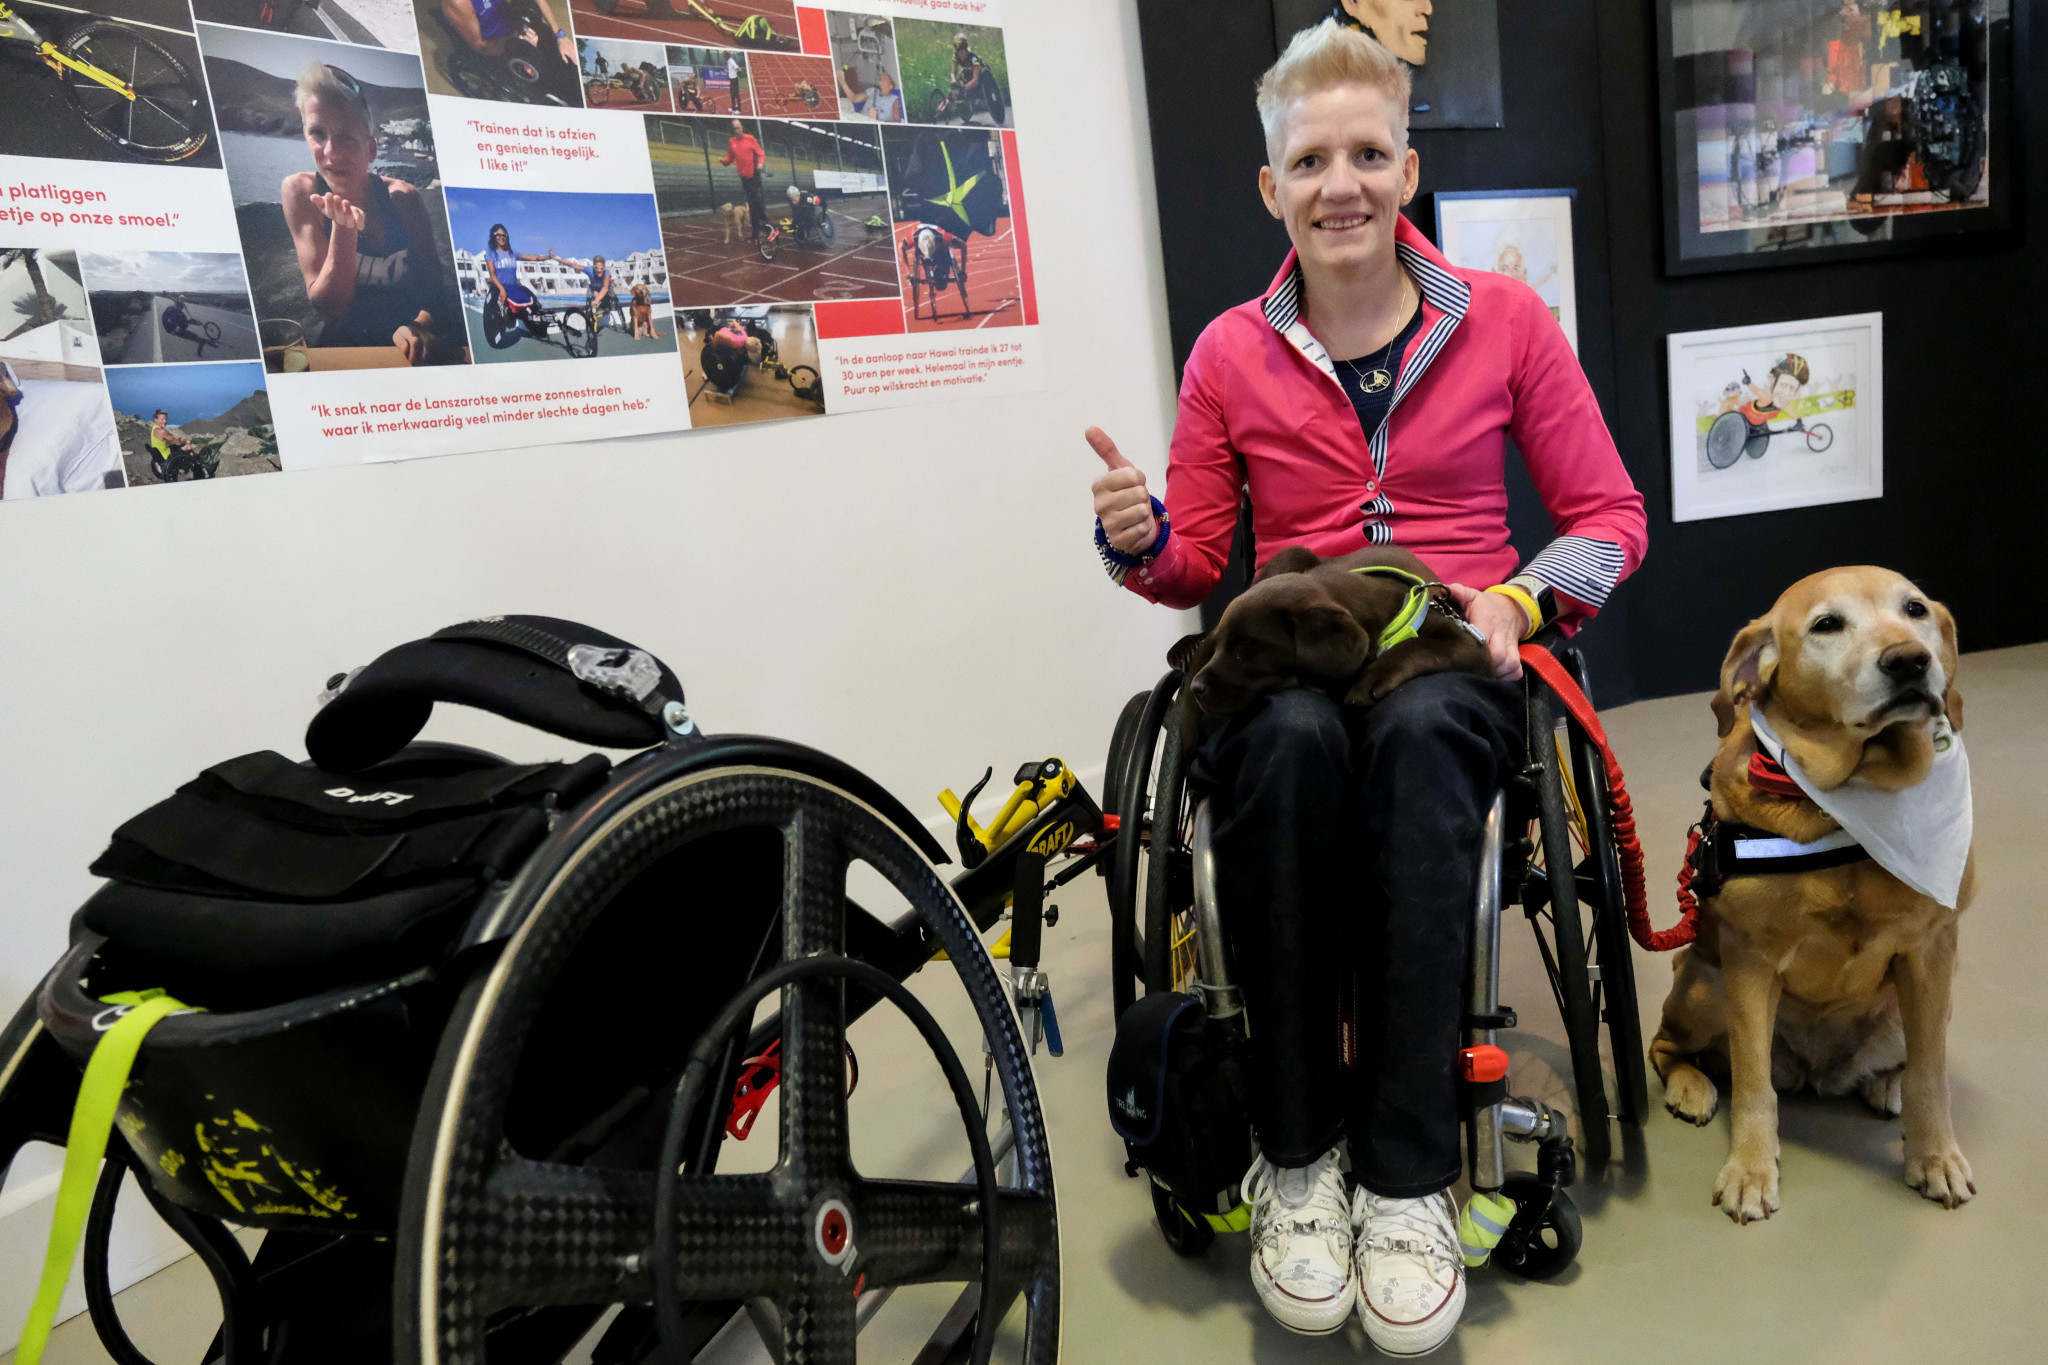 Belgian Marieke Vervoort decided to end her life through euthanasia after a long-running battle with tetraplegia ©Getty Images